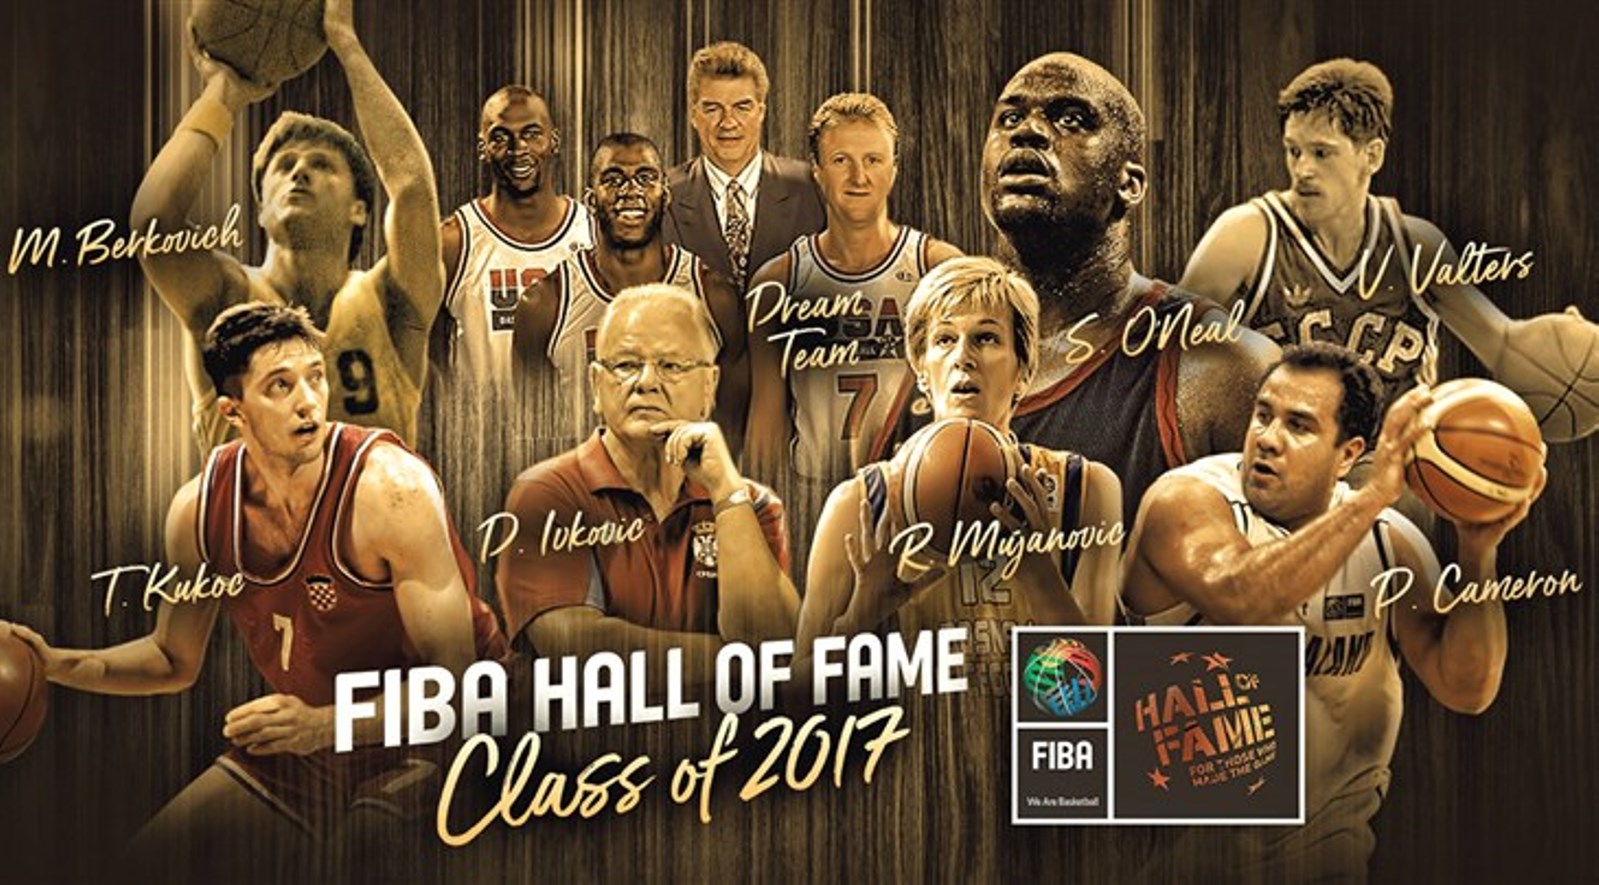 The 2017 class of inductees into the FIBA Hall of Fame in Switzerland includes Israeli Mickey Berkowitz (Miki Berkovich), back left.